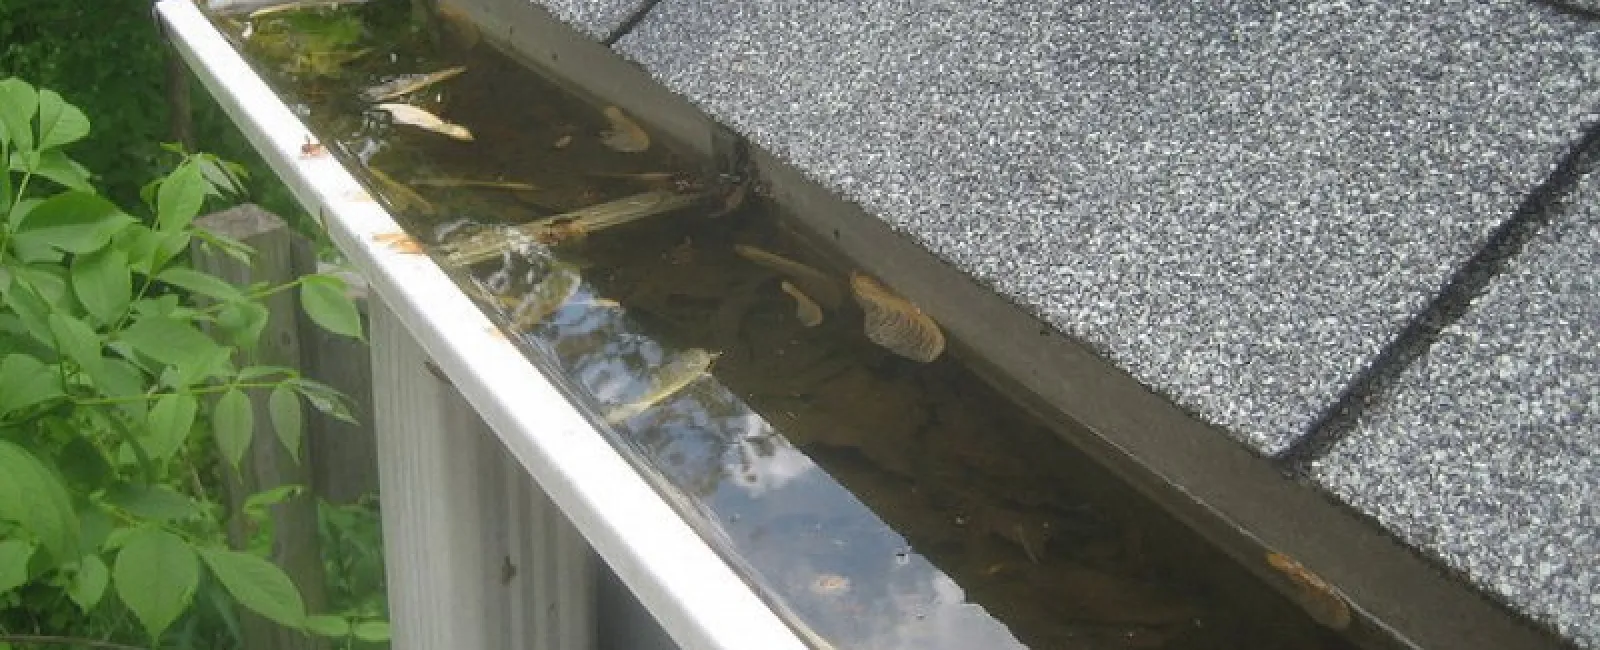 Gutter cleaning will keep your roof protected — learn how